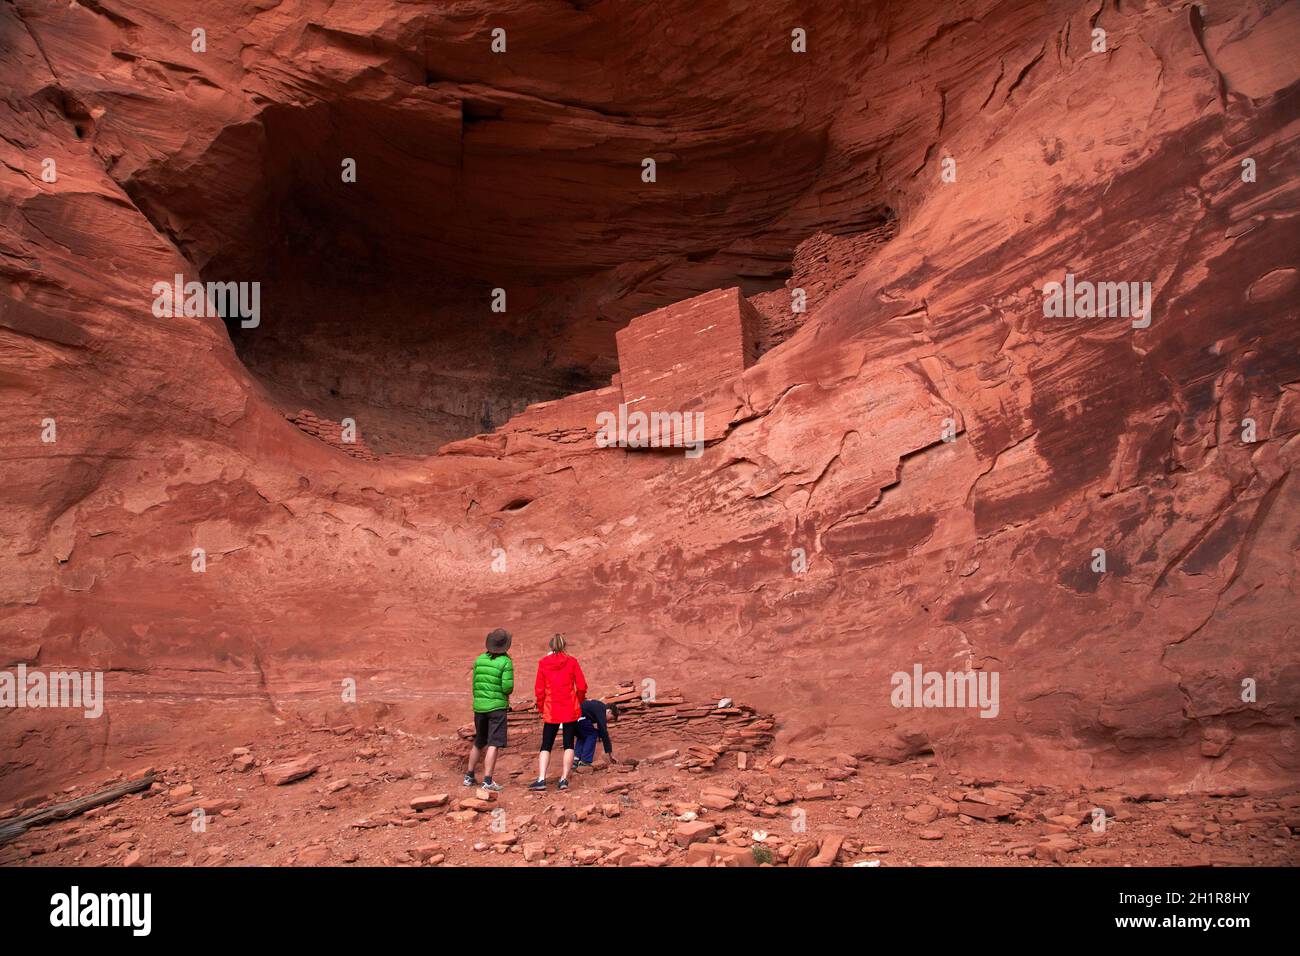 Tourists and ancient Anasazi cliff dwelling, Mystery Valley, Monument Valley, Navajo Nation, Arizona, USA (model released) Stock Photo